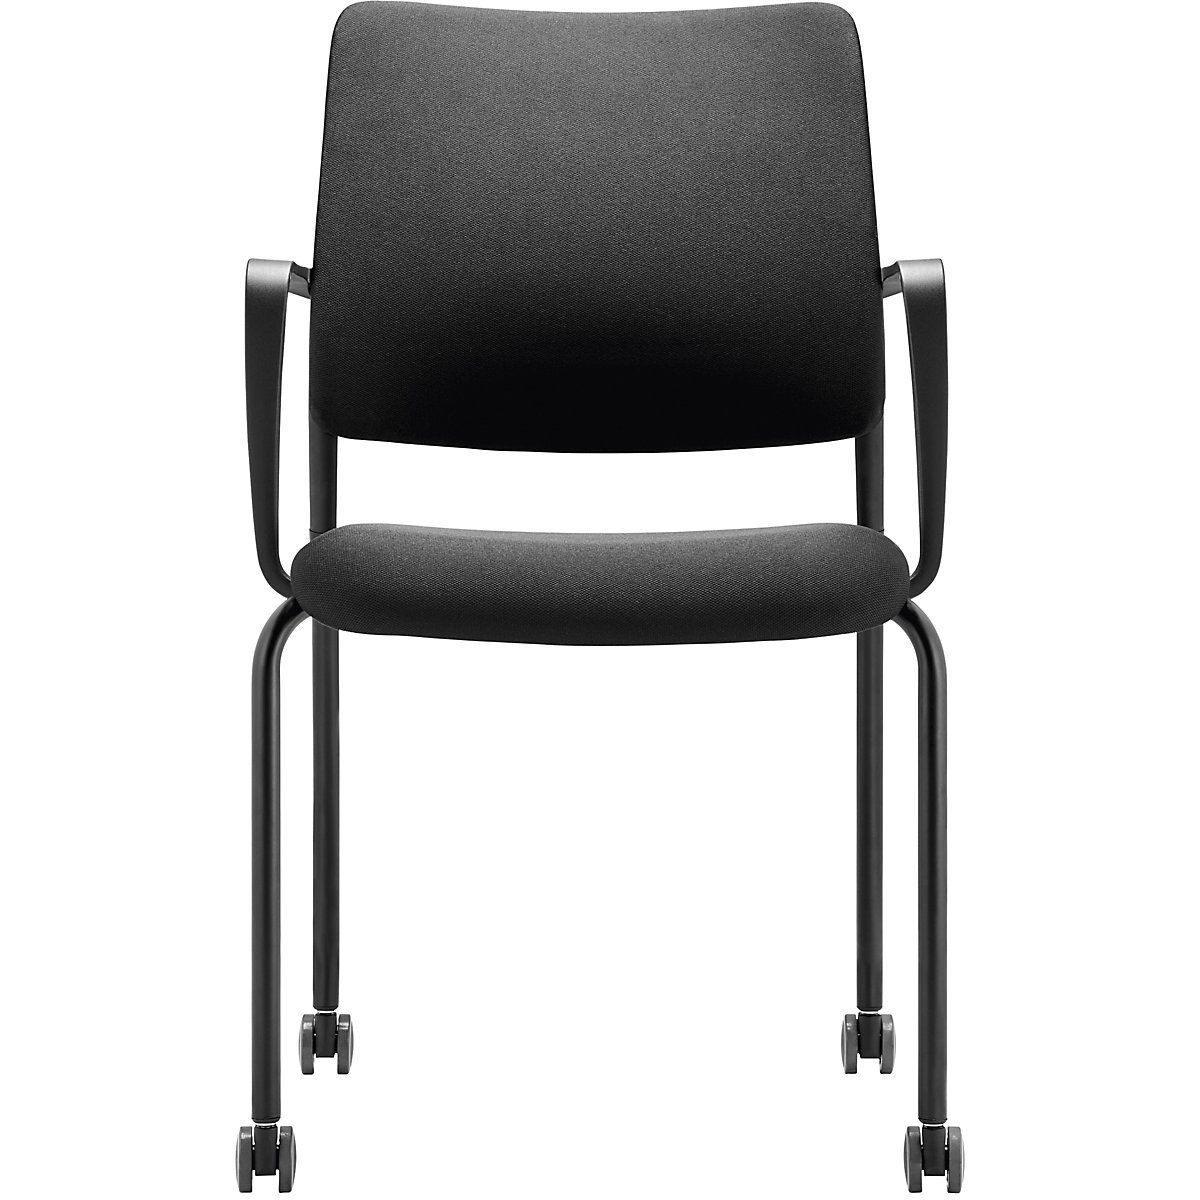 TO-SYNC meet meeting room chair – TrendOffice, with upholstered back rest, pack of 4, black, with arm rests and castors-6